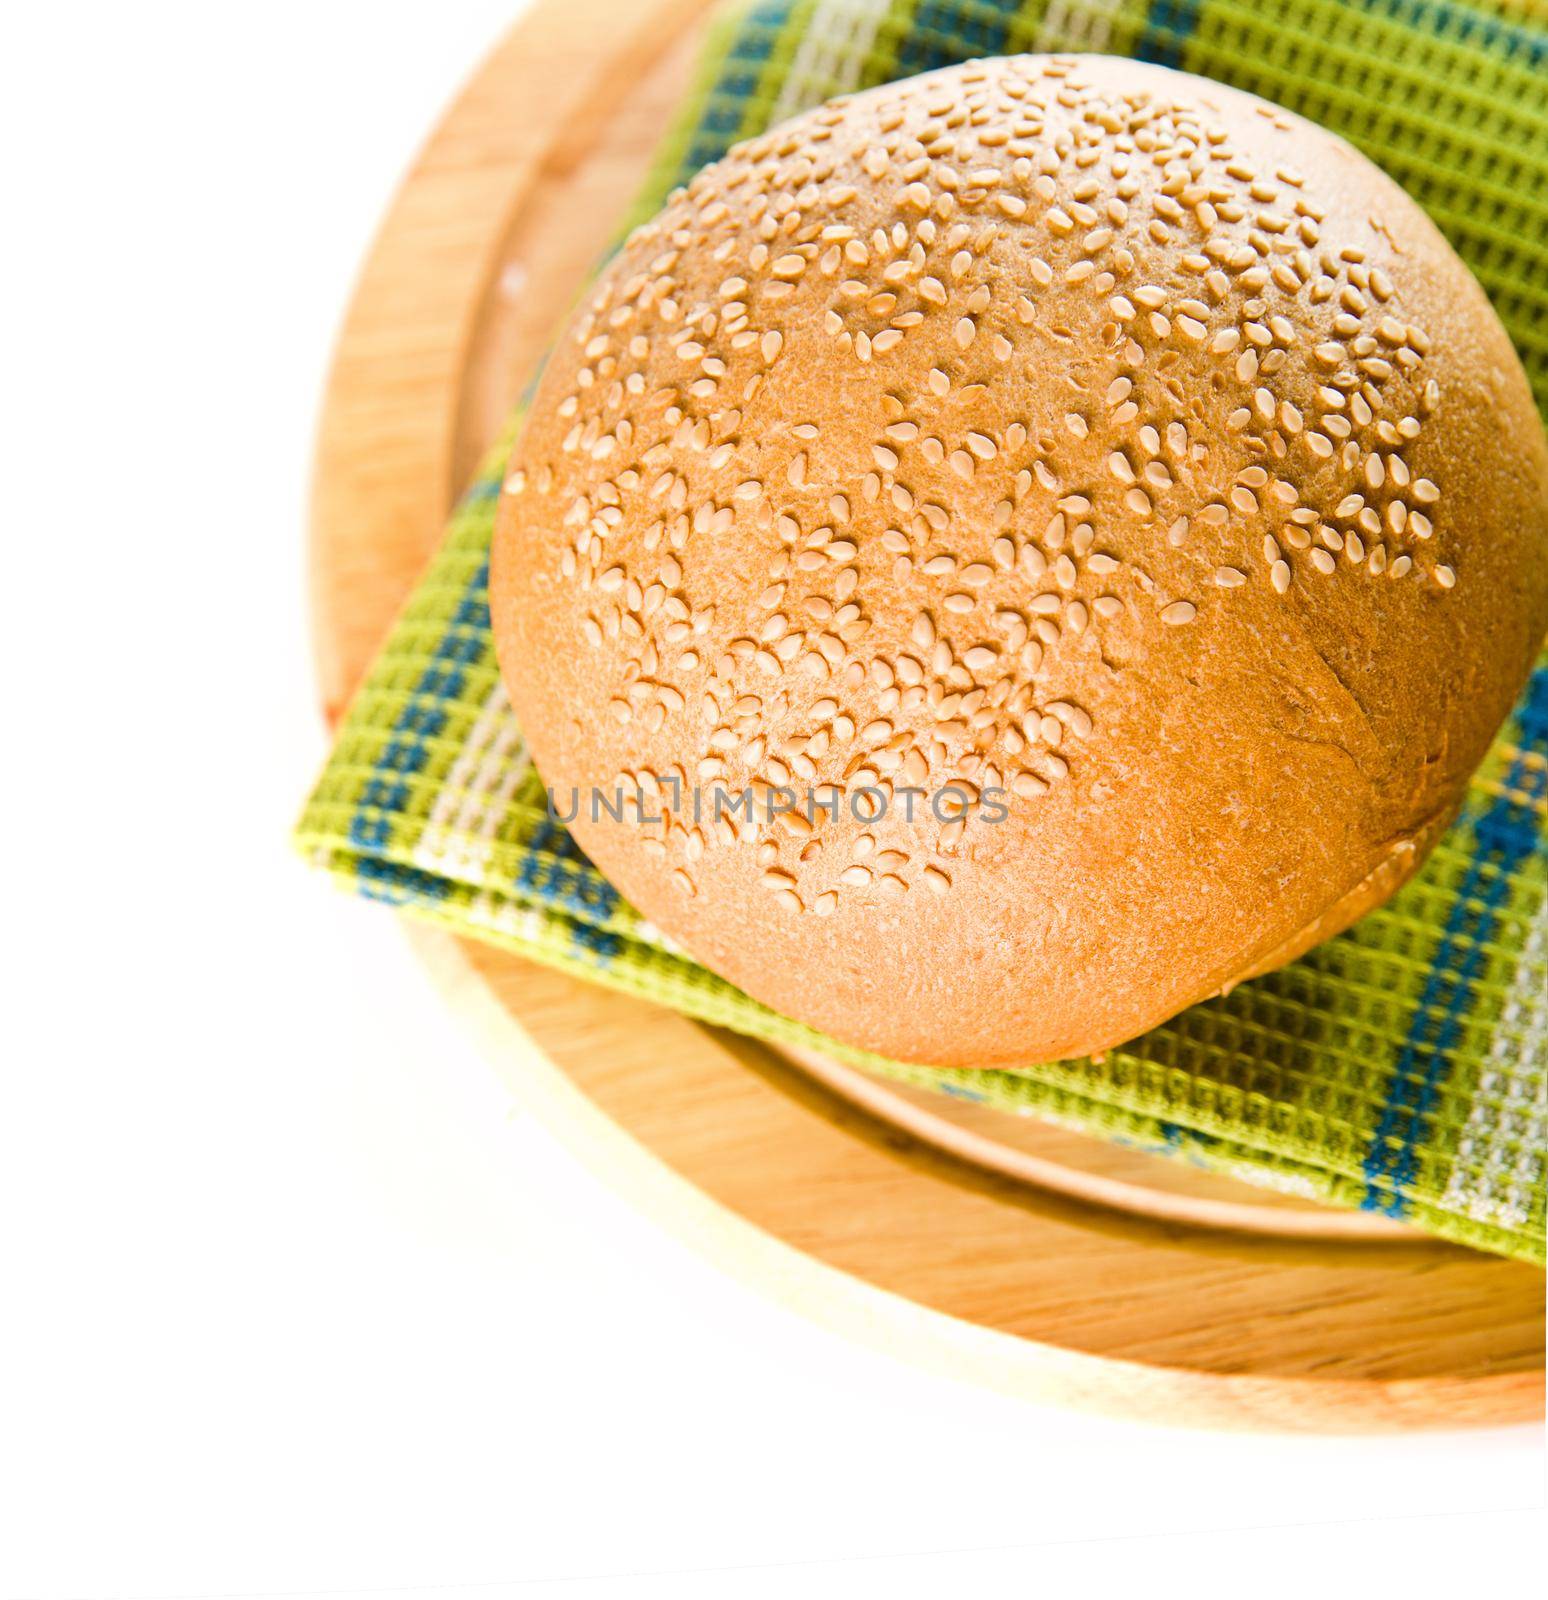 newly baked bread on a white background